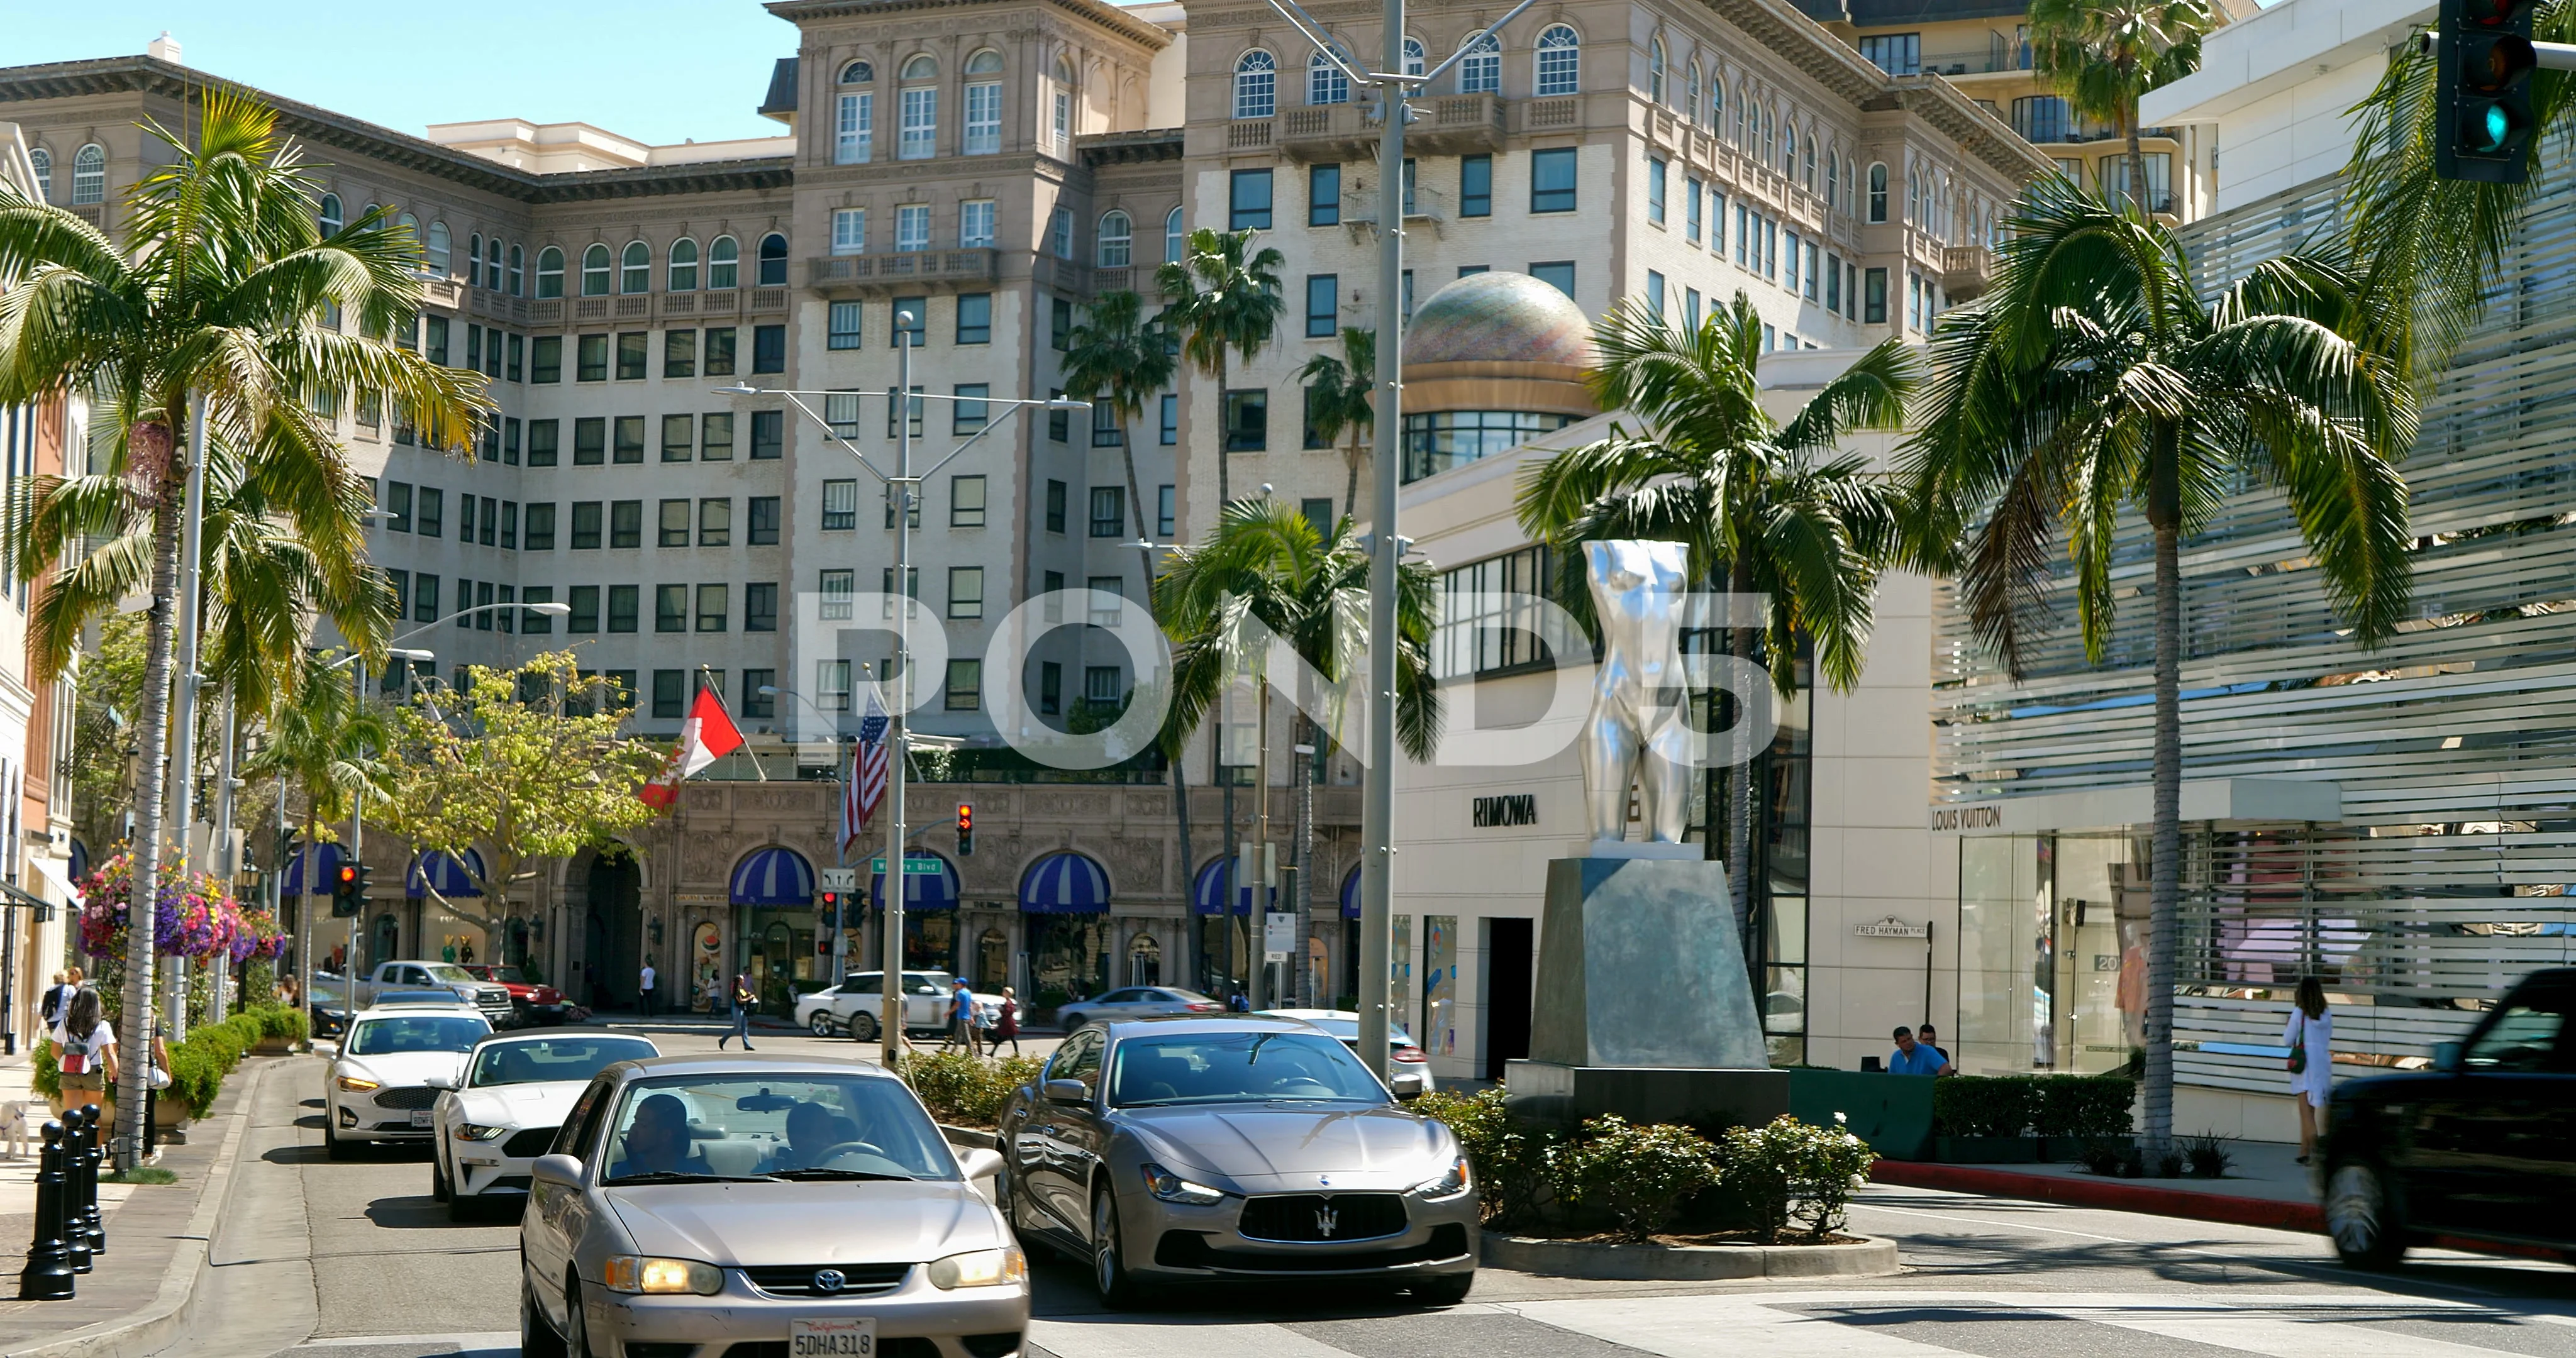 Louis Vuitton Store in Beverly Hills Editorial Photo - Image of